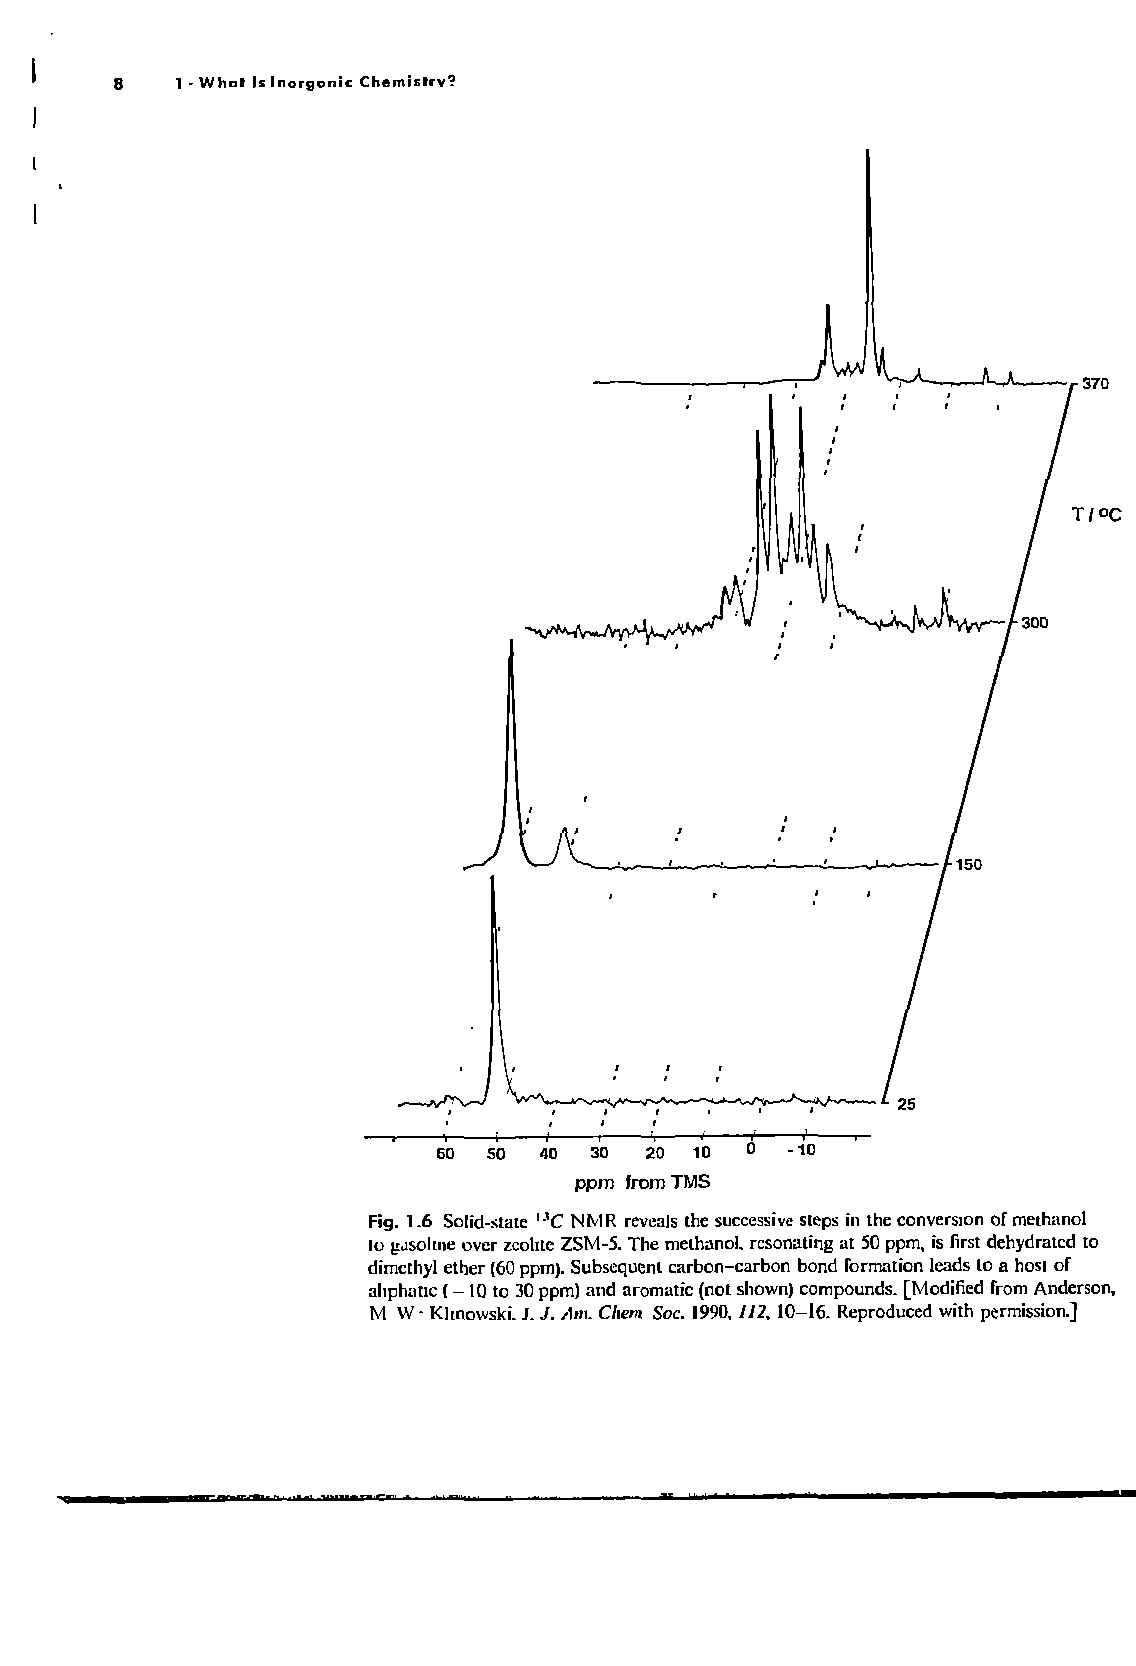 Fig. 1.6 Solid-state - C NMR reveals the successive steps in the conversion of methanol lo gasoline over zeolite ZSM-5. The methanol, resonating at 50 ppm, is first dehydrated to dimethyl ether (60 ppm). Subsequent carbon-carbon bond formation leads lo a hosi of aliphatic (-10 to 30 ppm) and aromatic (not shown) compounds. [Modified from Anderson, M W - Kltnowski. J. J. /1 i. Chem Soc. 1990, 112, 10-16. Reproduced with permission.]...